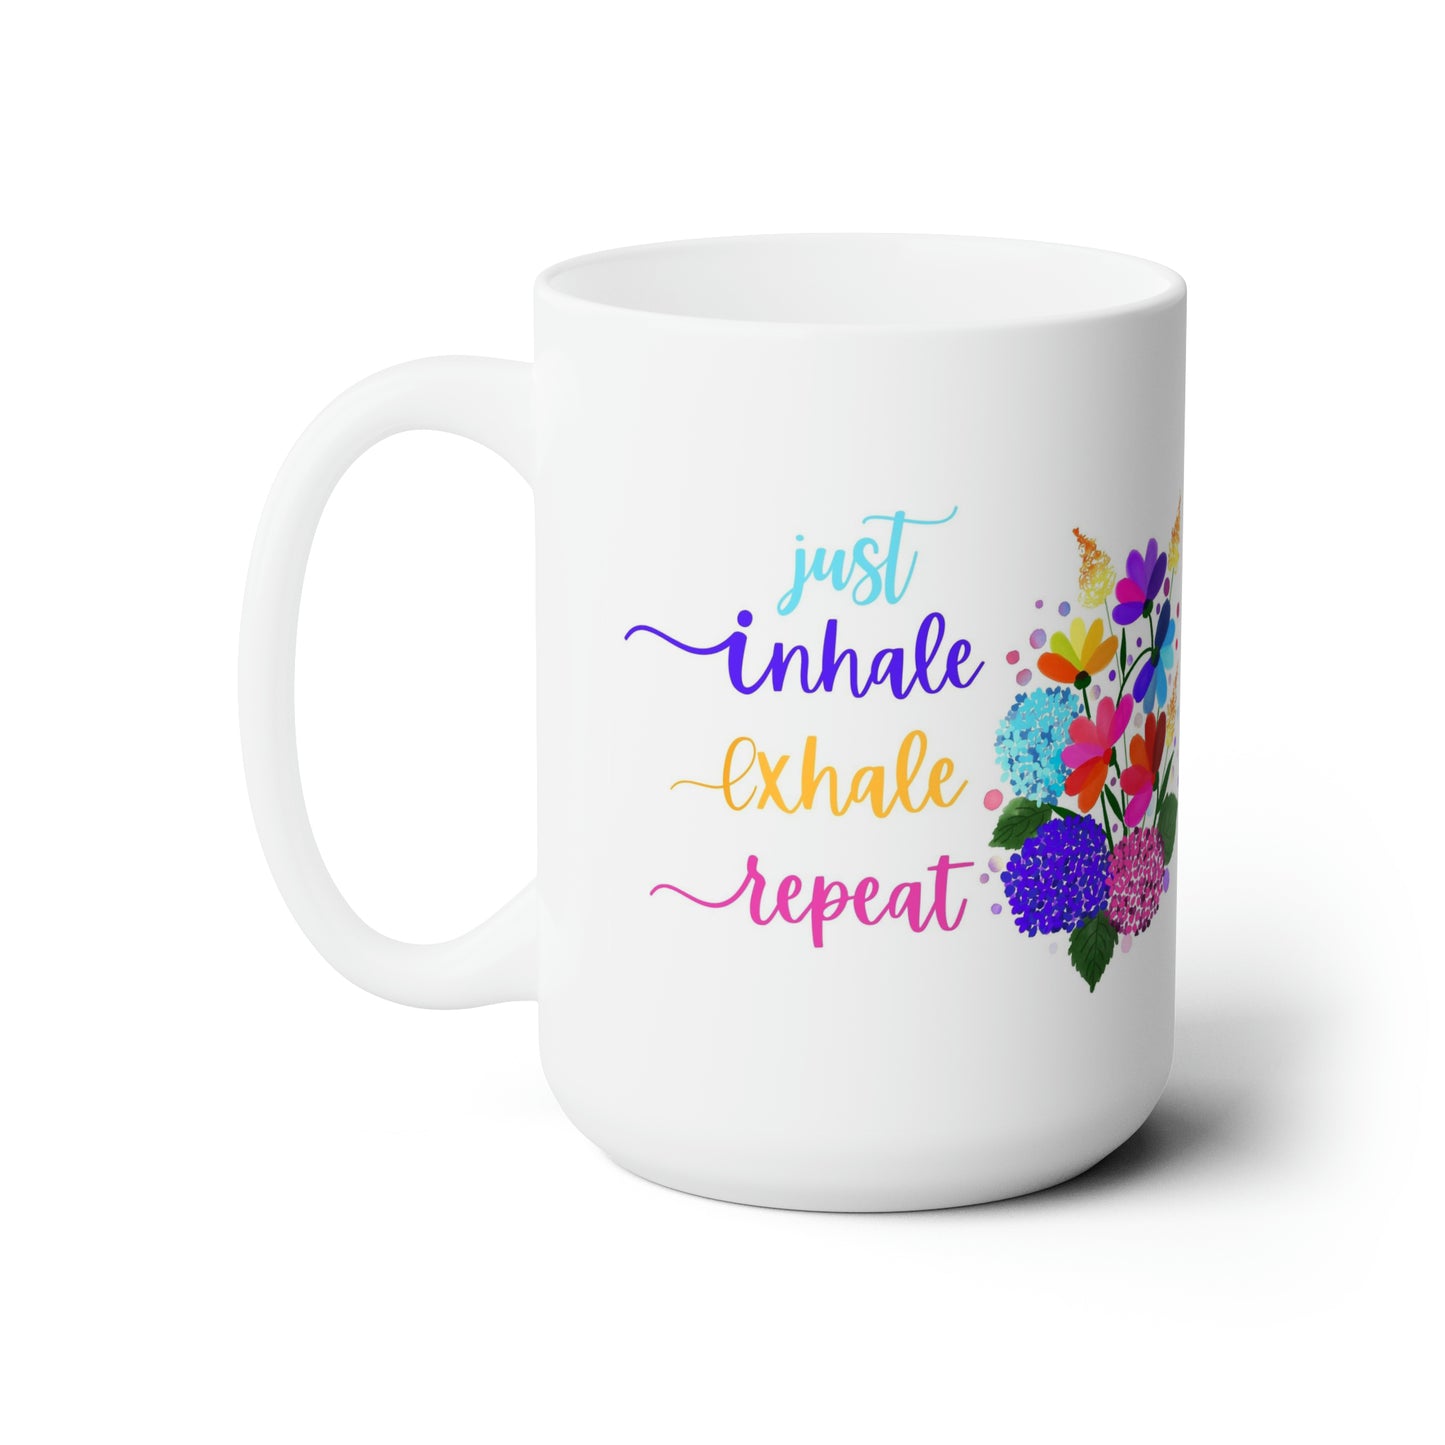 Just Inhale Exhale Repeat Large Coffee Mugs,  15oz Coffee Mugs For Mental Health Coffee Mug for Her, Inspirational Coffee Mug For Gifts